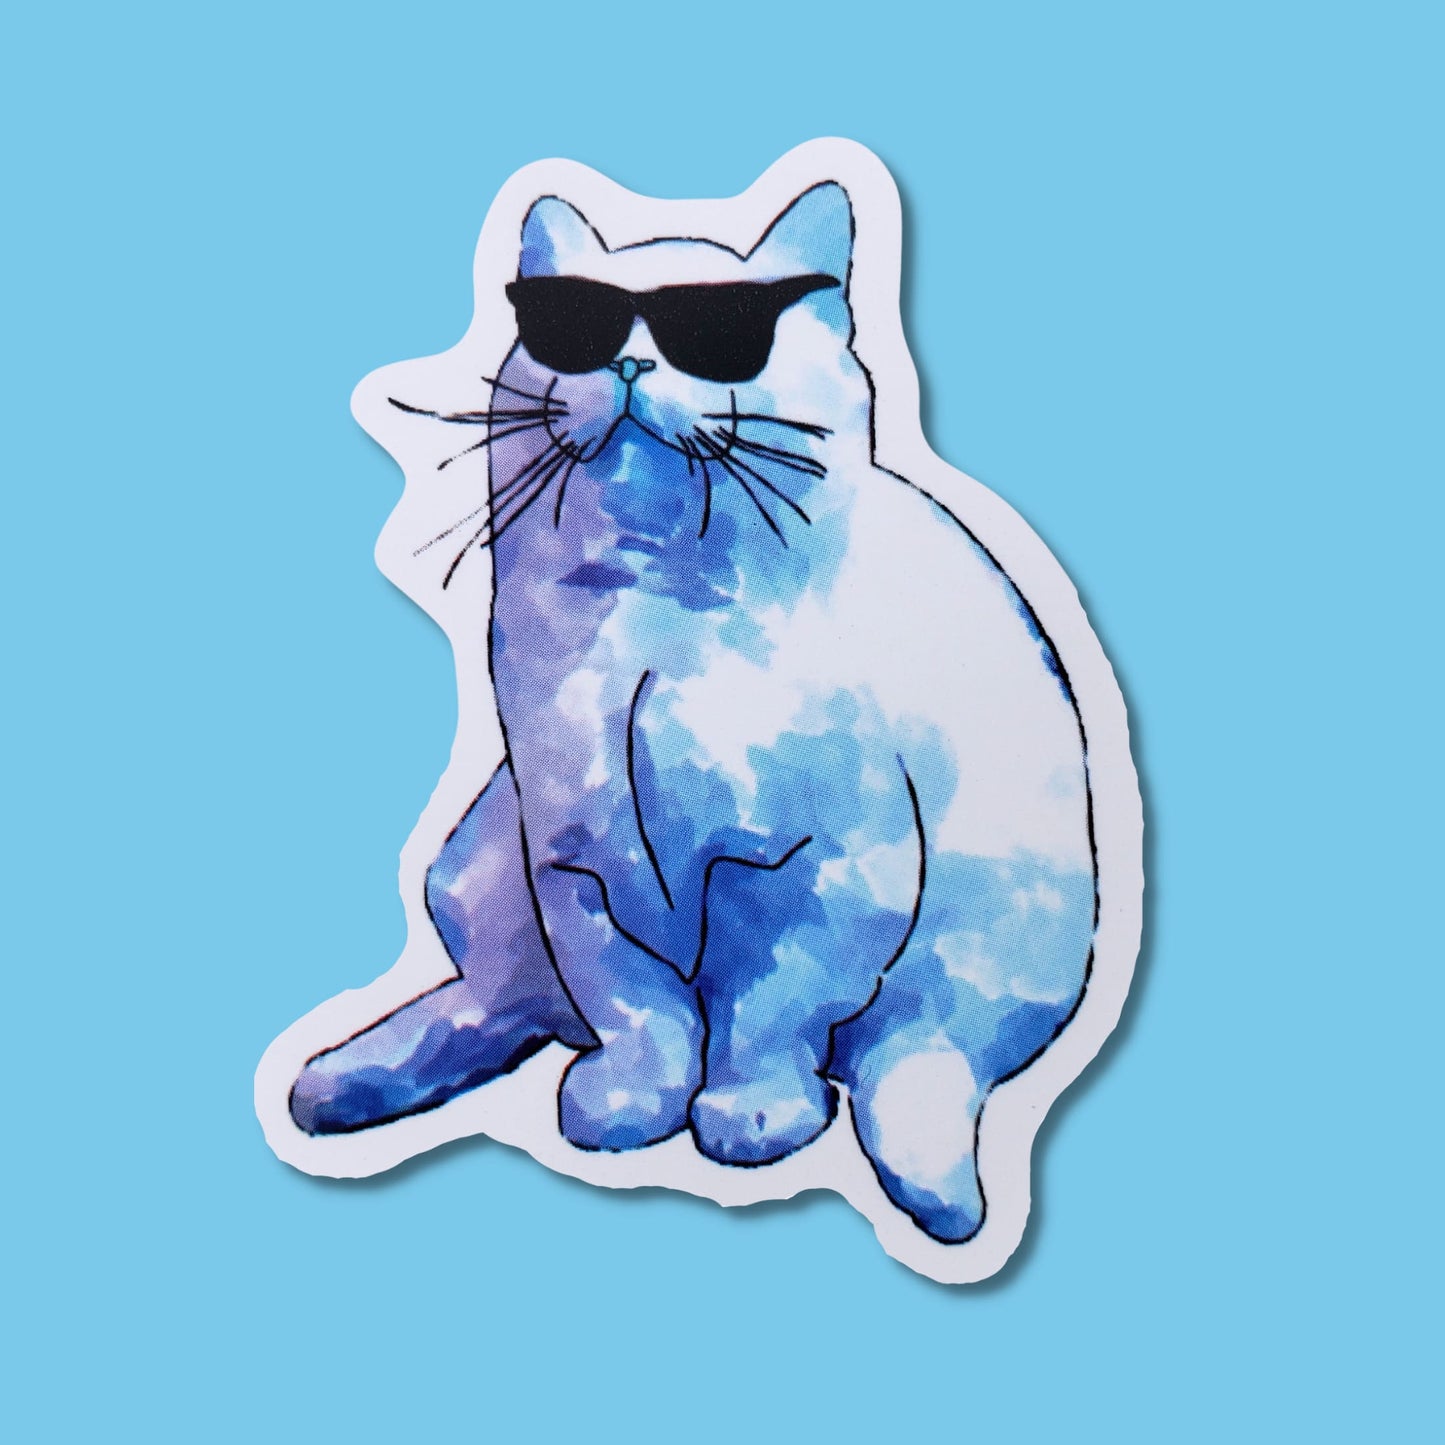 Cool Cat Waterproof Sticker from Confetti Kitty, Only 1.00